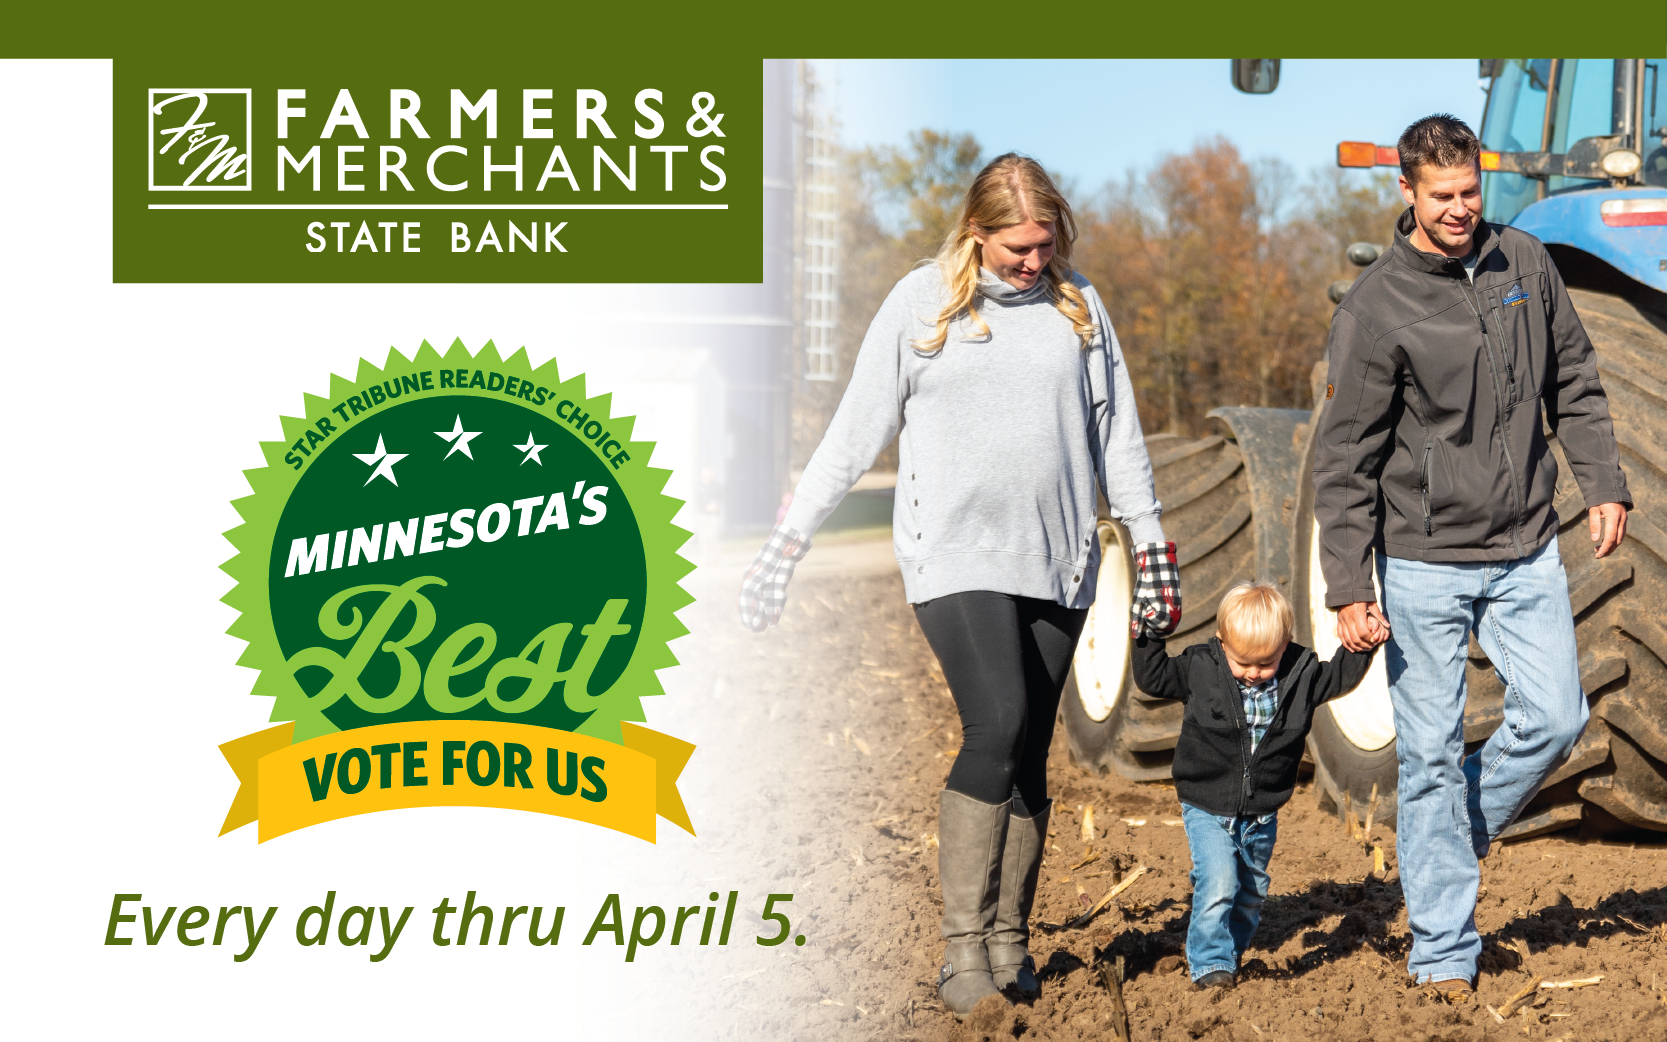 Vote Daily for Farmers & Merchants!